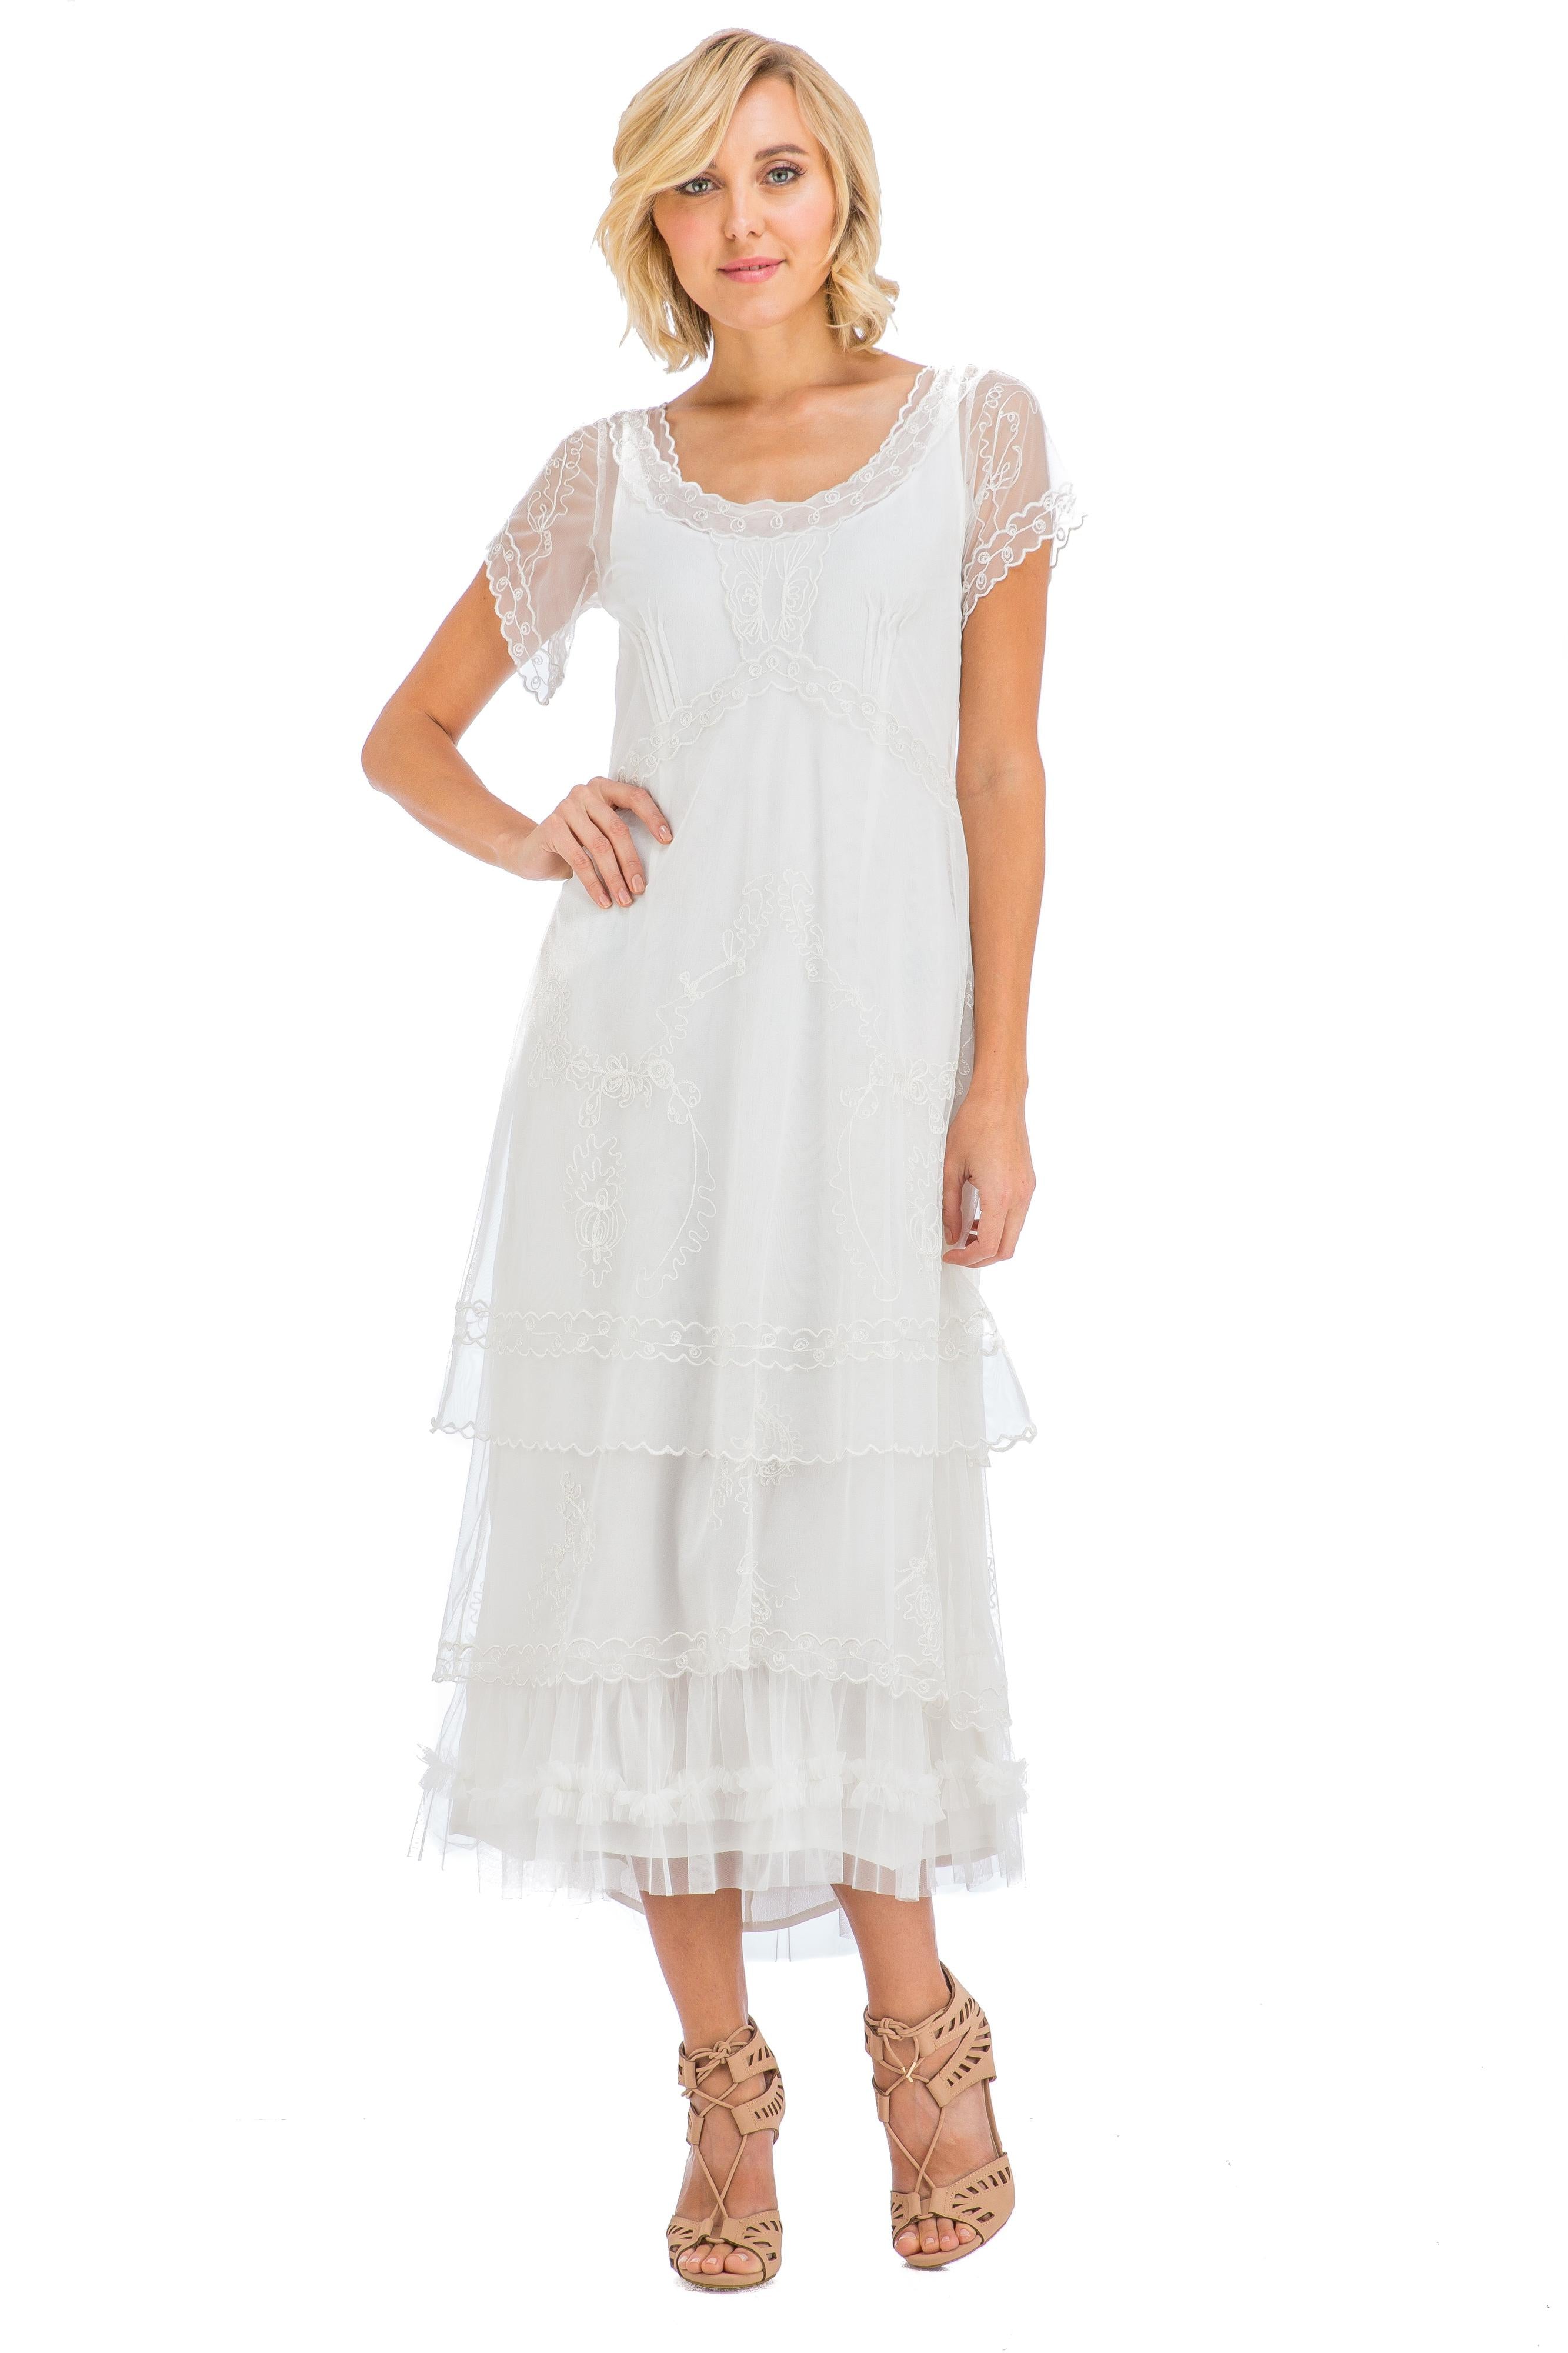 Arrianna CL-169 Vintage Style Party Dress in Ivory by Nataya – WardrobeShop